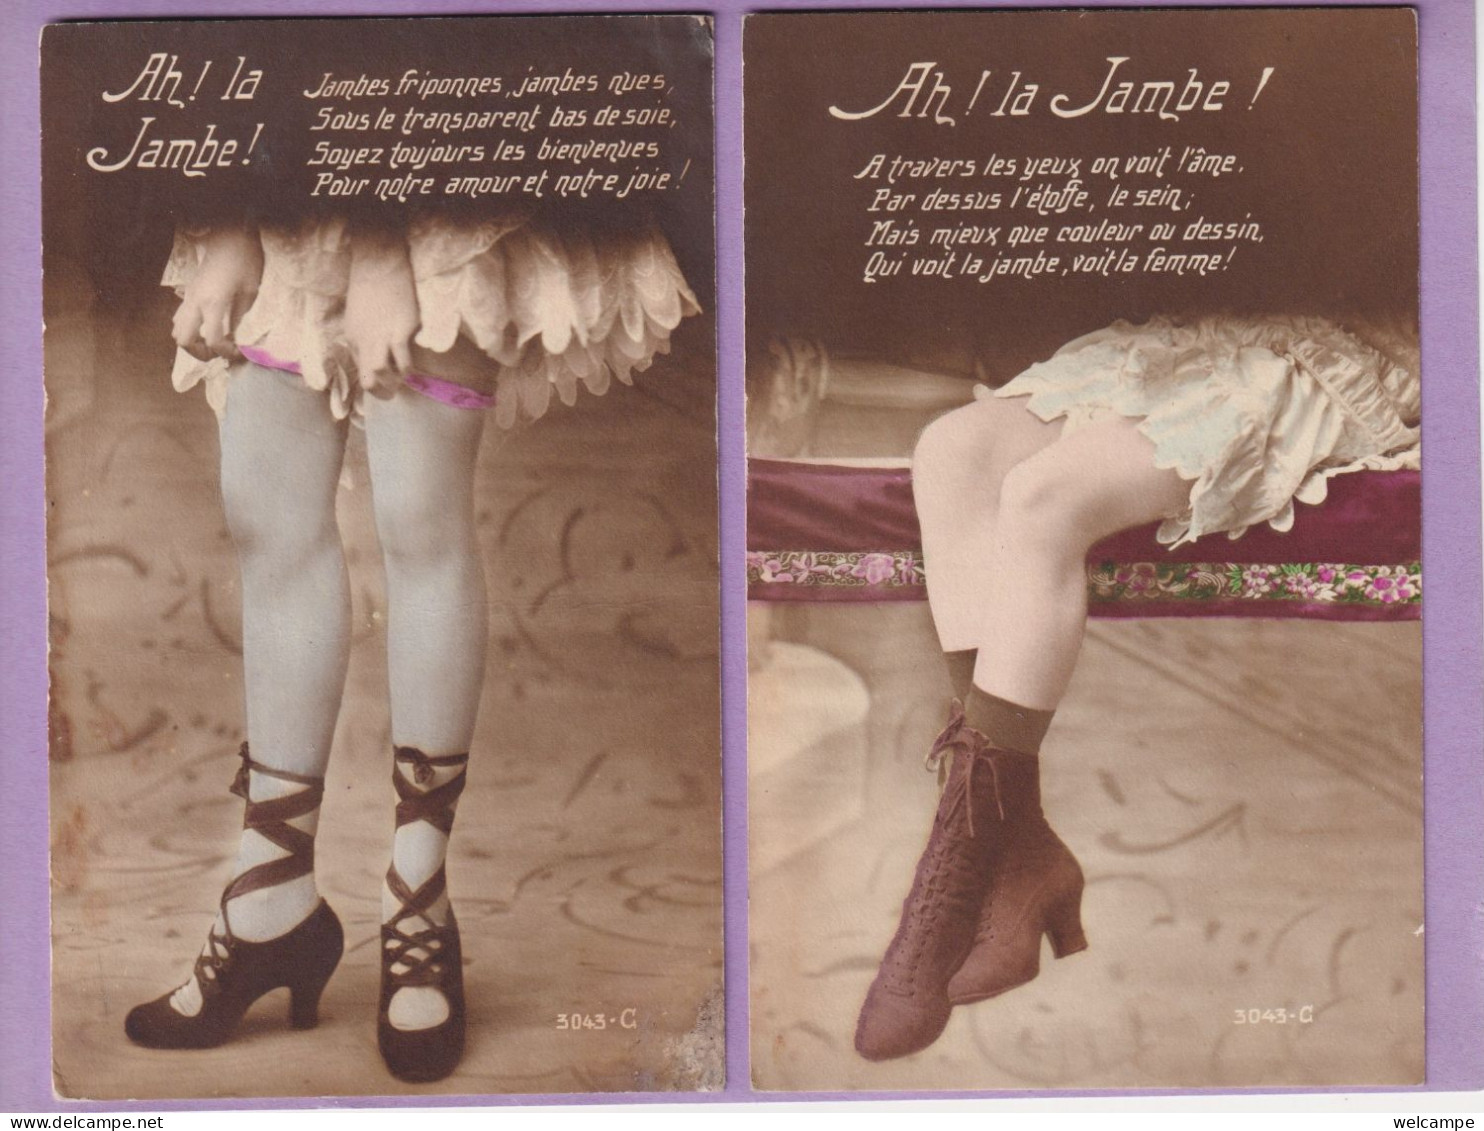 TWO OLD PHOTO POSTCARDS - ' AH LA JAMBE ' - THE LEGS OF A WOMAN - Femmes